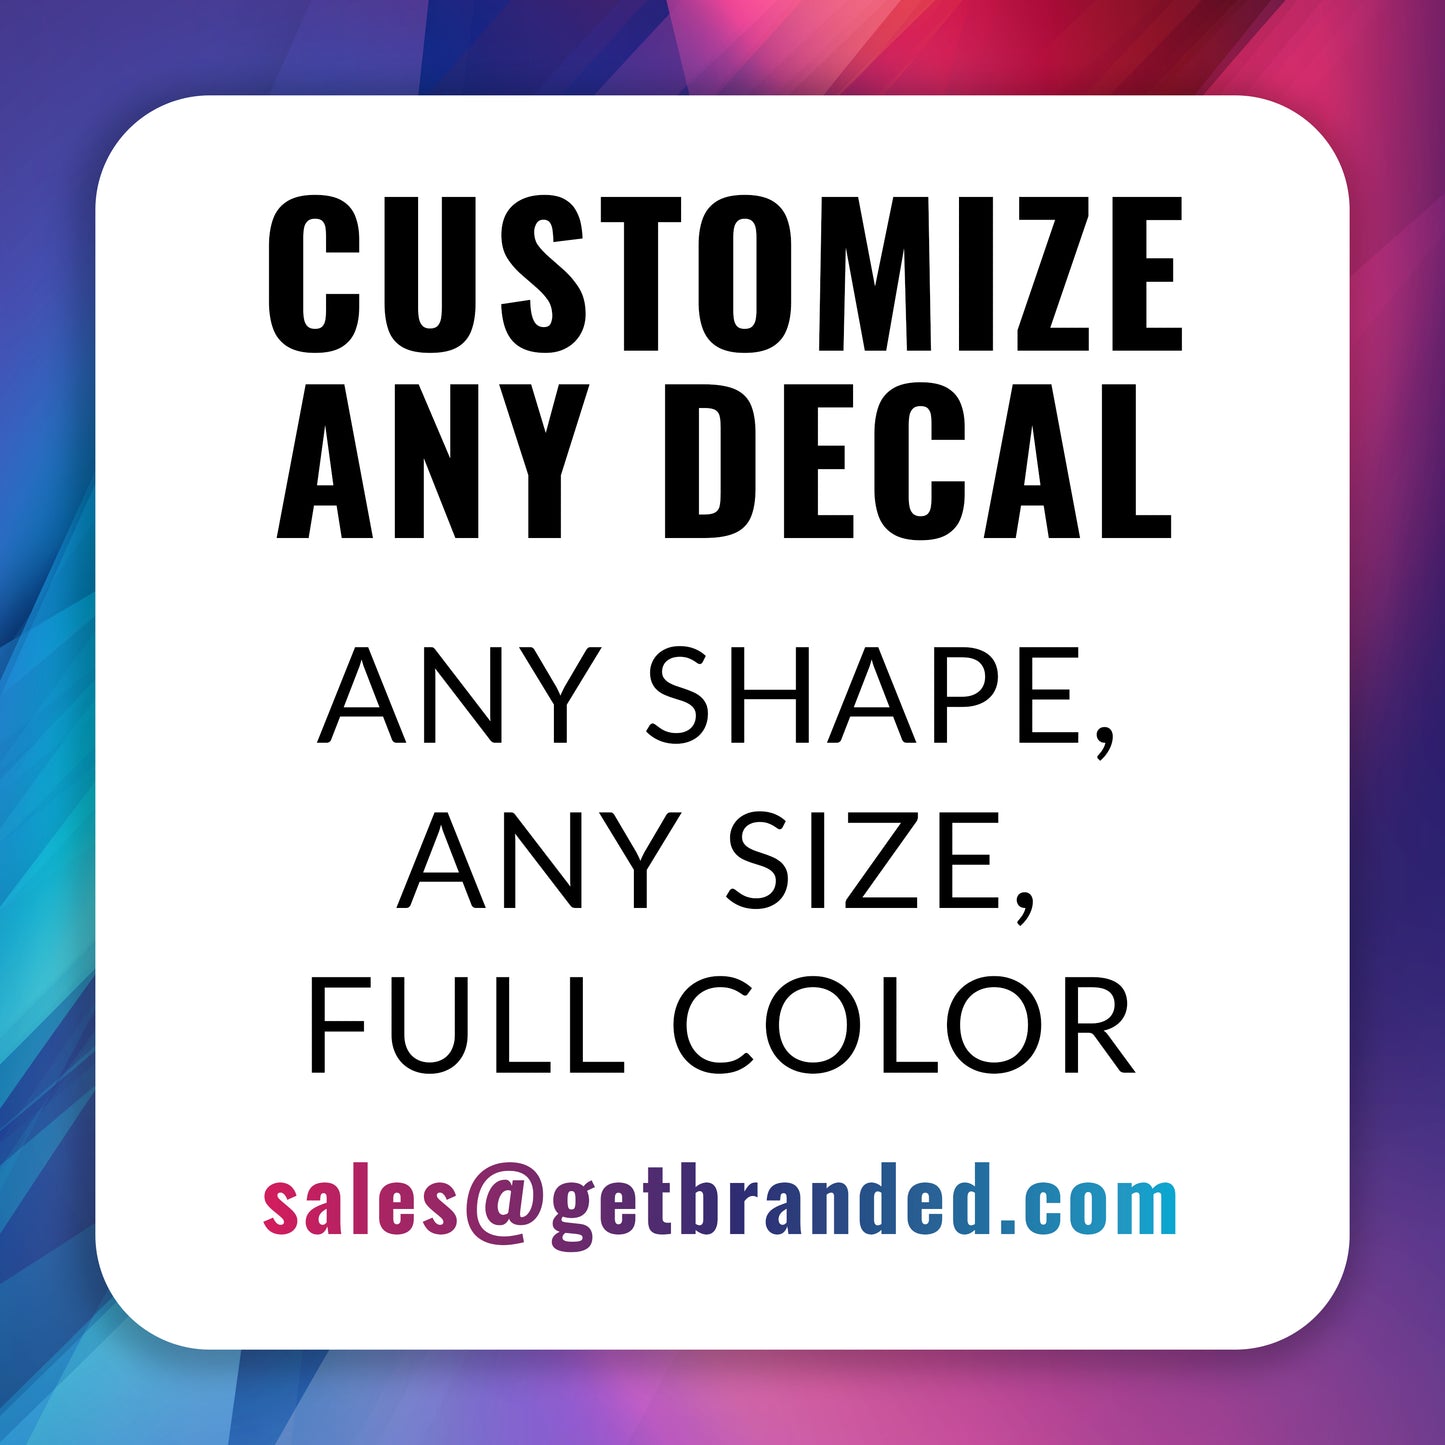 GetBranded can customize any decal to any shape, any size, and print in full color